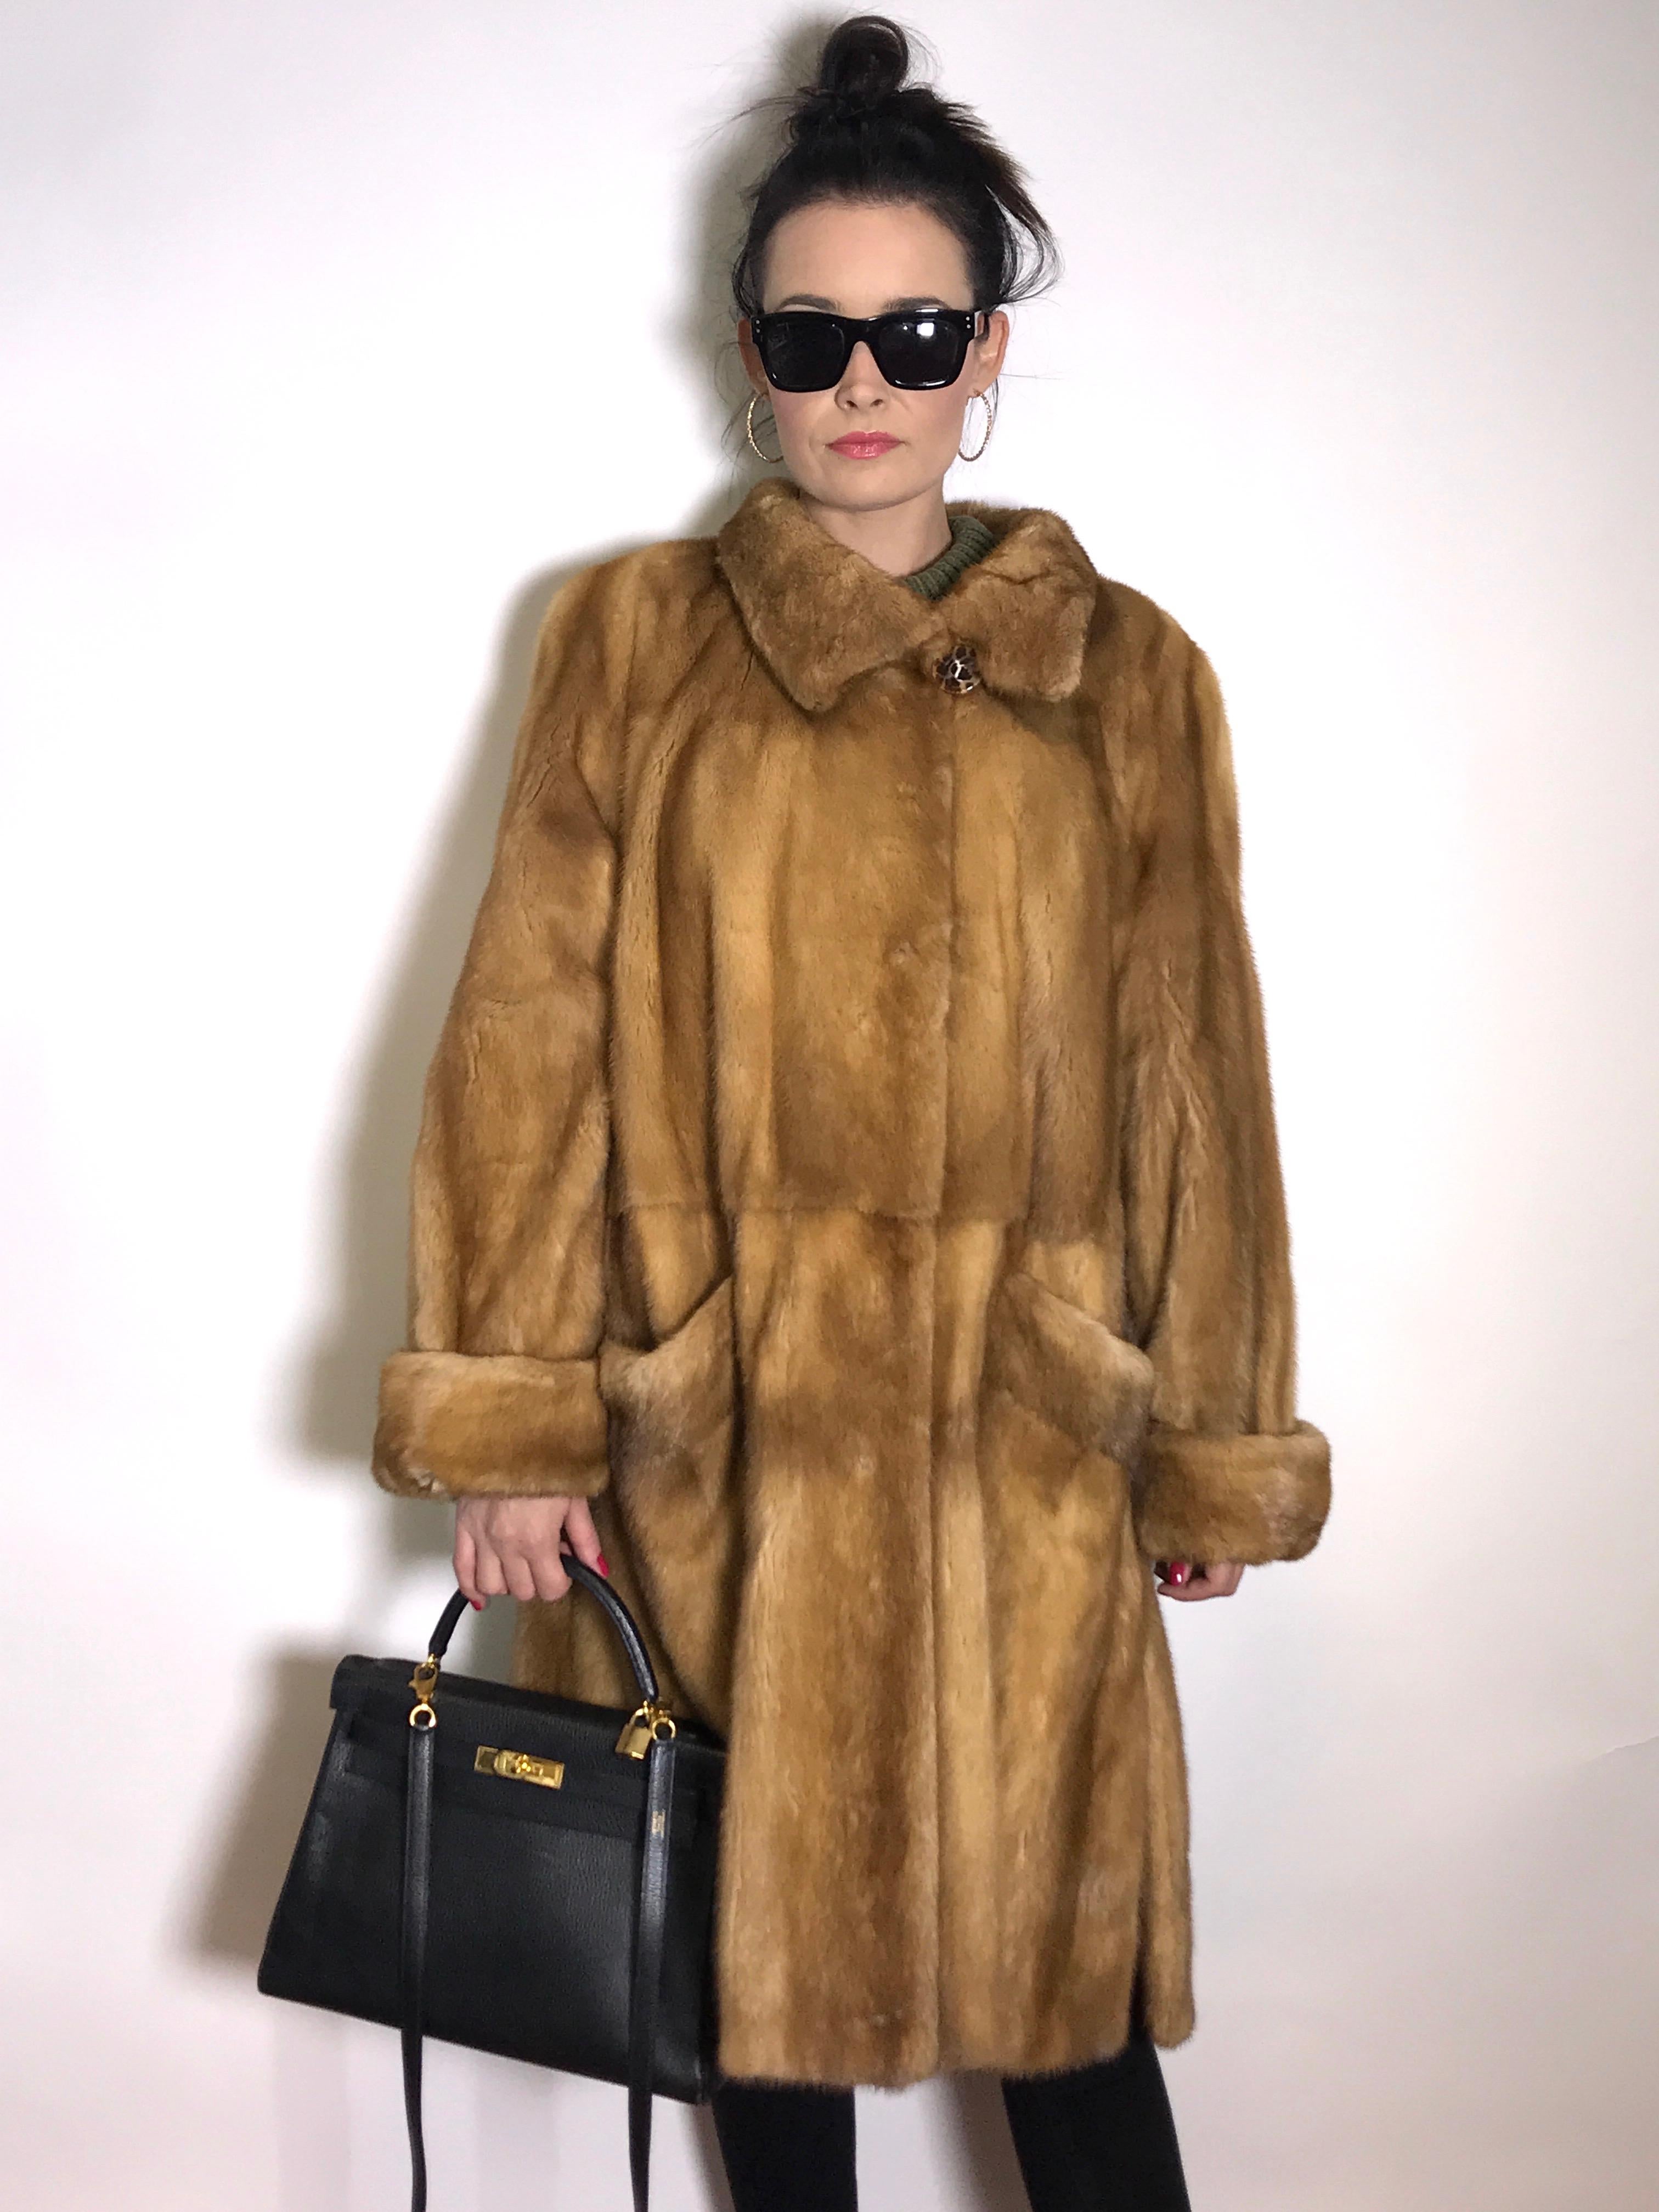 High class gold silk mink 3/4 jacket / coat.
Exclusively made by the furrier.

Size EU: 40-42 / M-L
Total length: 104 cm
Shoulder width: 44 cm
Sleeve length: 60 cm

The jacket is in excellent condition, almost never worn.

- Our model wears an EU